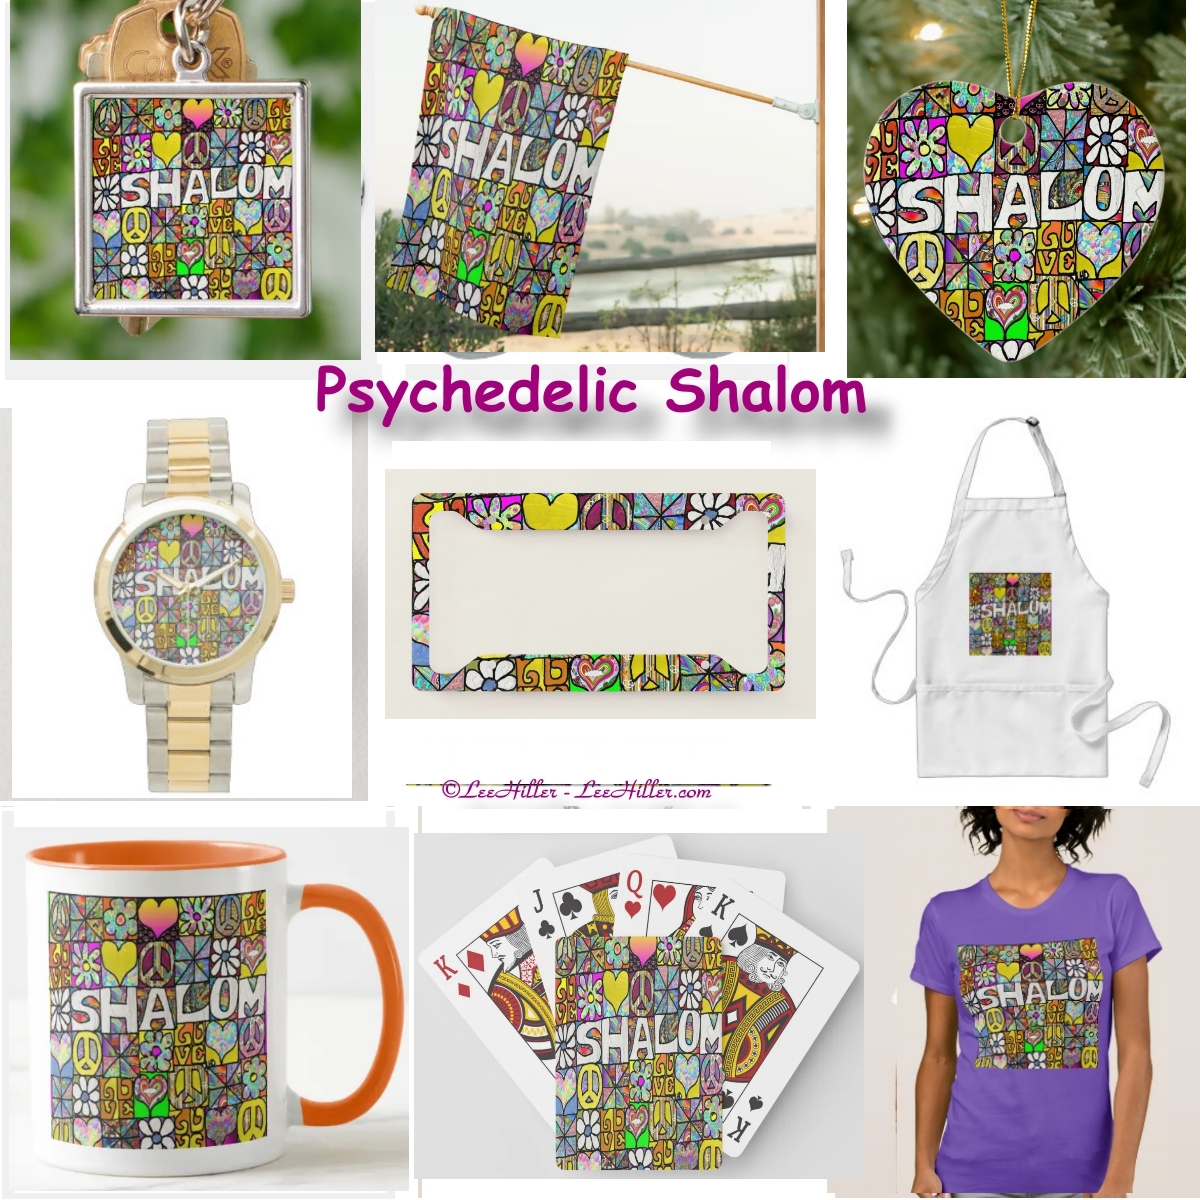 🌸✌️☮🌼❤️💮🌸✌️☮🌼❤️💮 Retro 60s #Psychedelic #Shalom #Ar #Retro #Peace#love #hope #shoppingonline #giftideas #gifts #onlineshopping zazzle.com/collections/re…